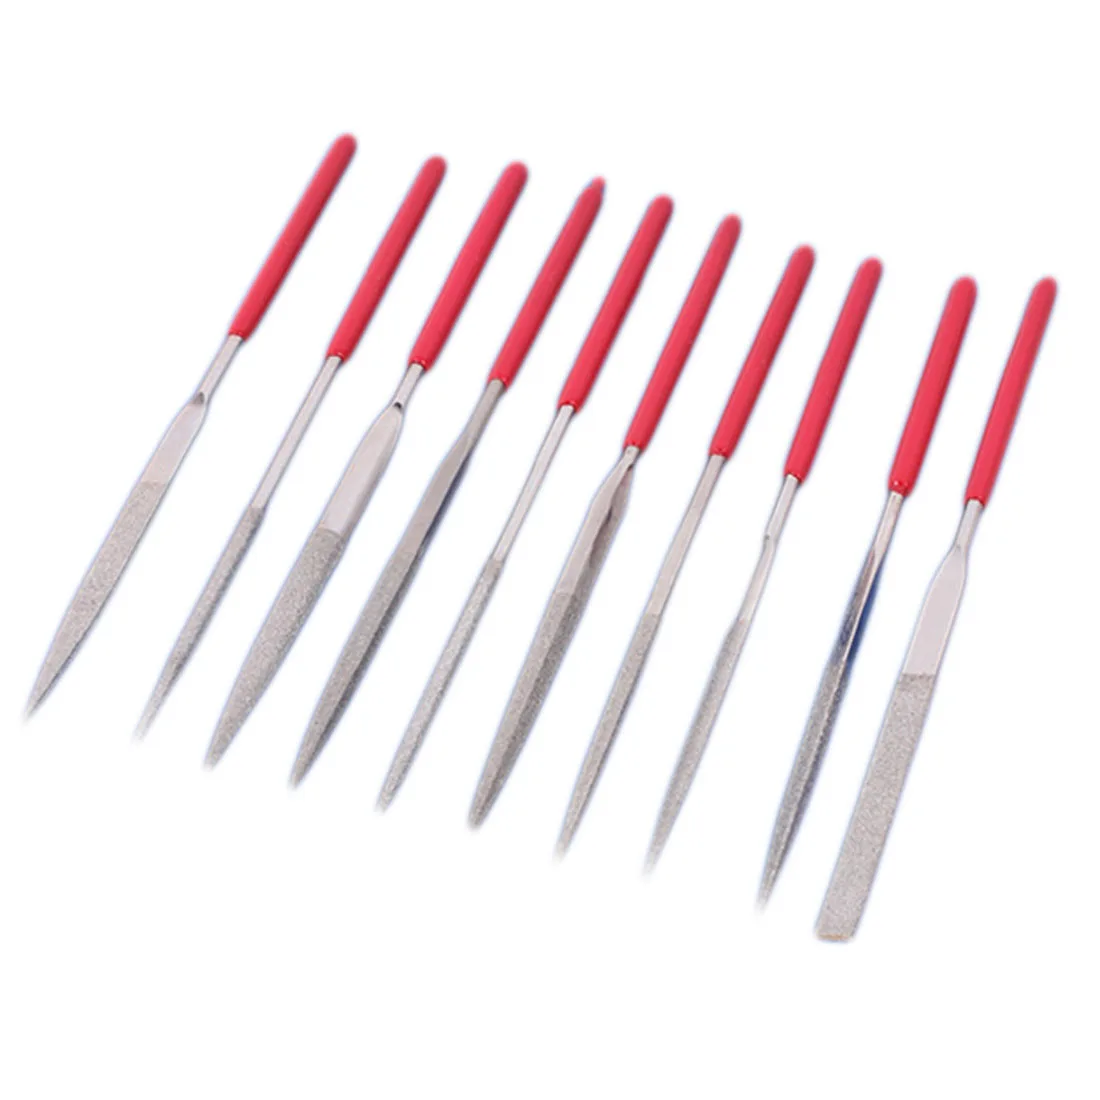 

NEW 10PC 140mm Diamond Mini Needle File Set Handy Tools for Ceramic Glass Gem Stone Hobbies and Crafts